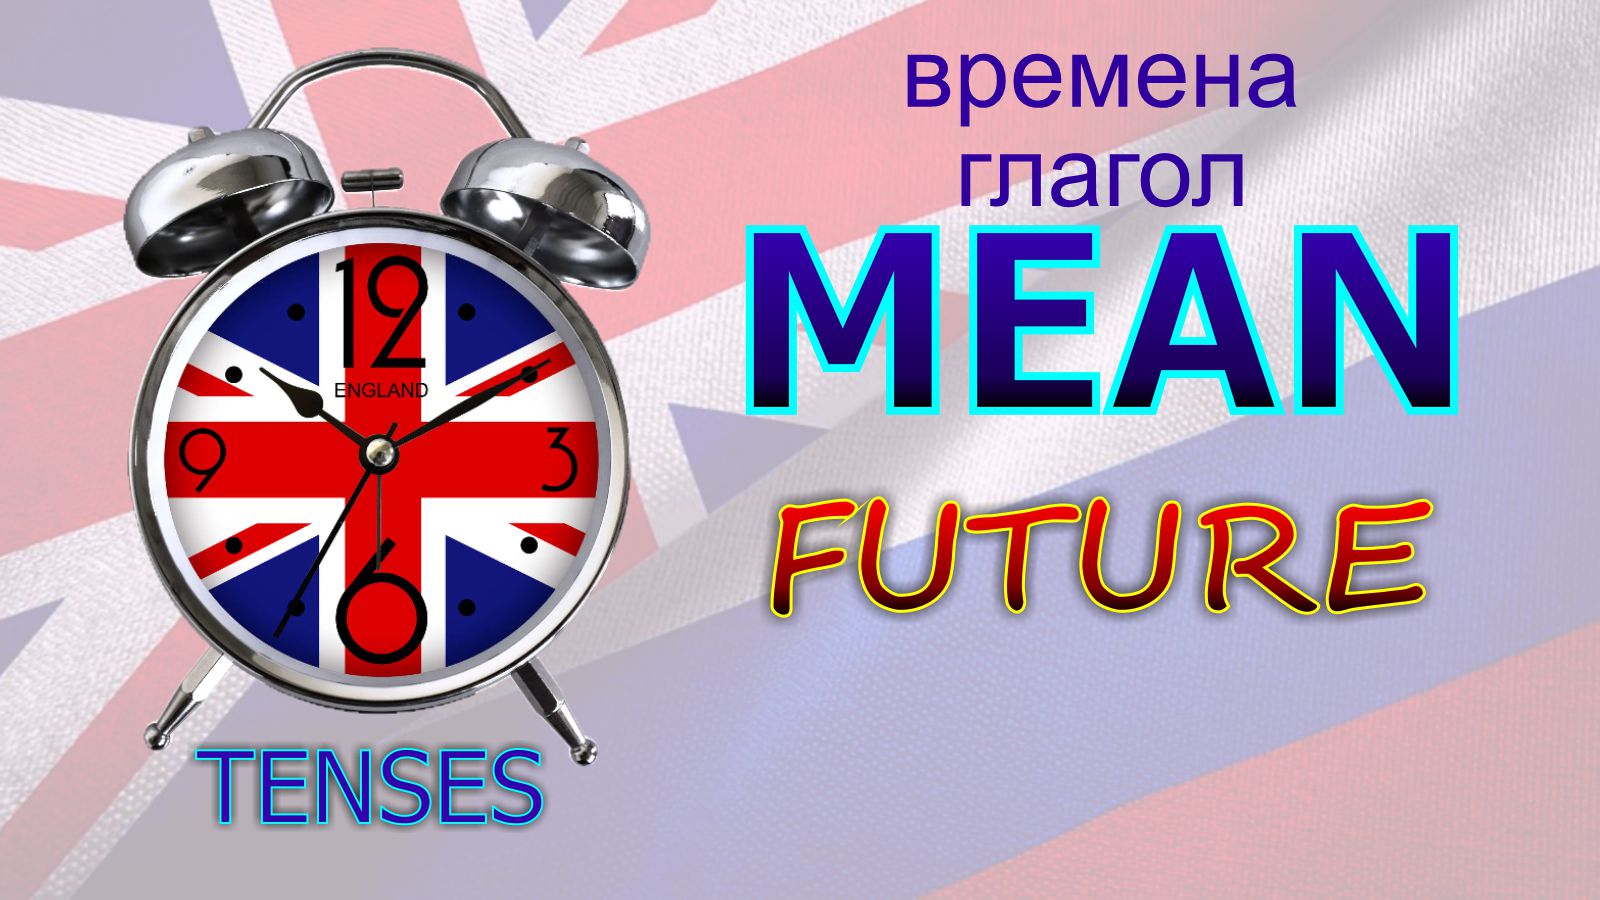 Времена. Глагол to MEAN. FUTURE